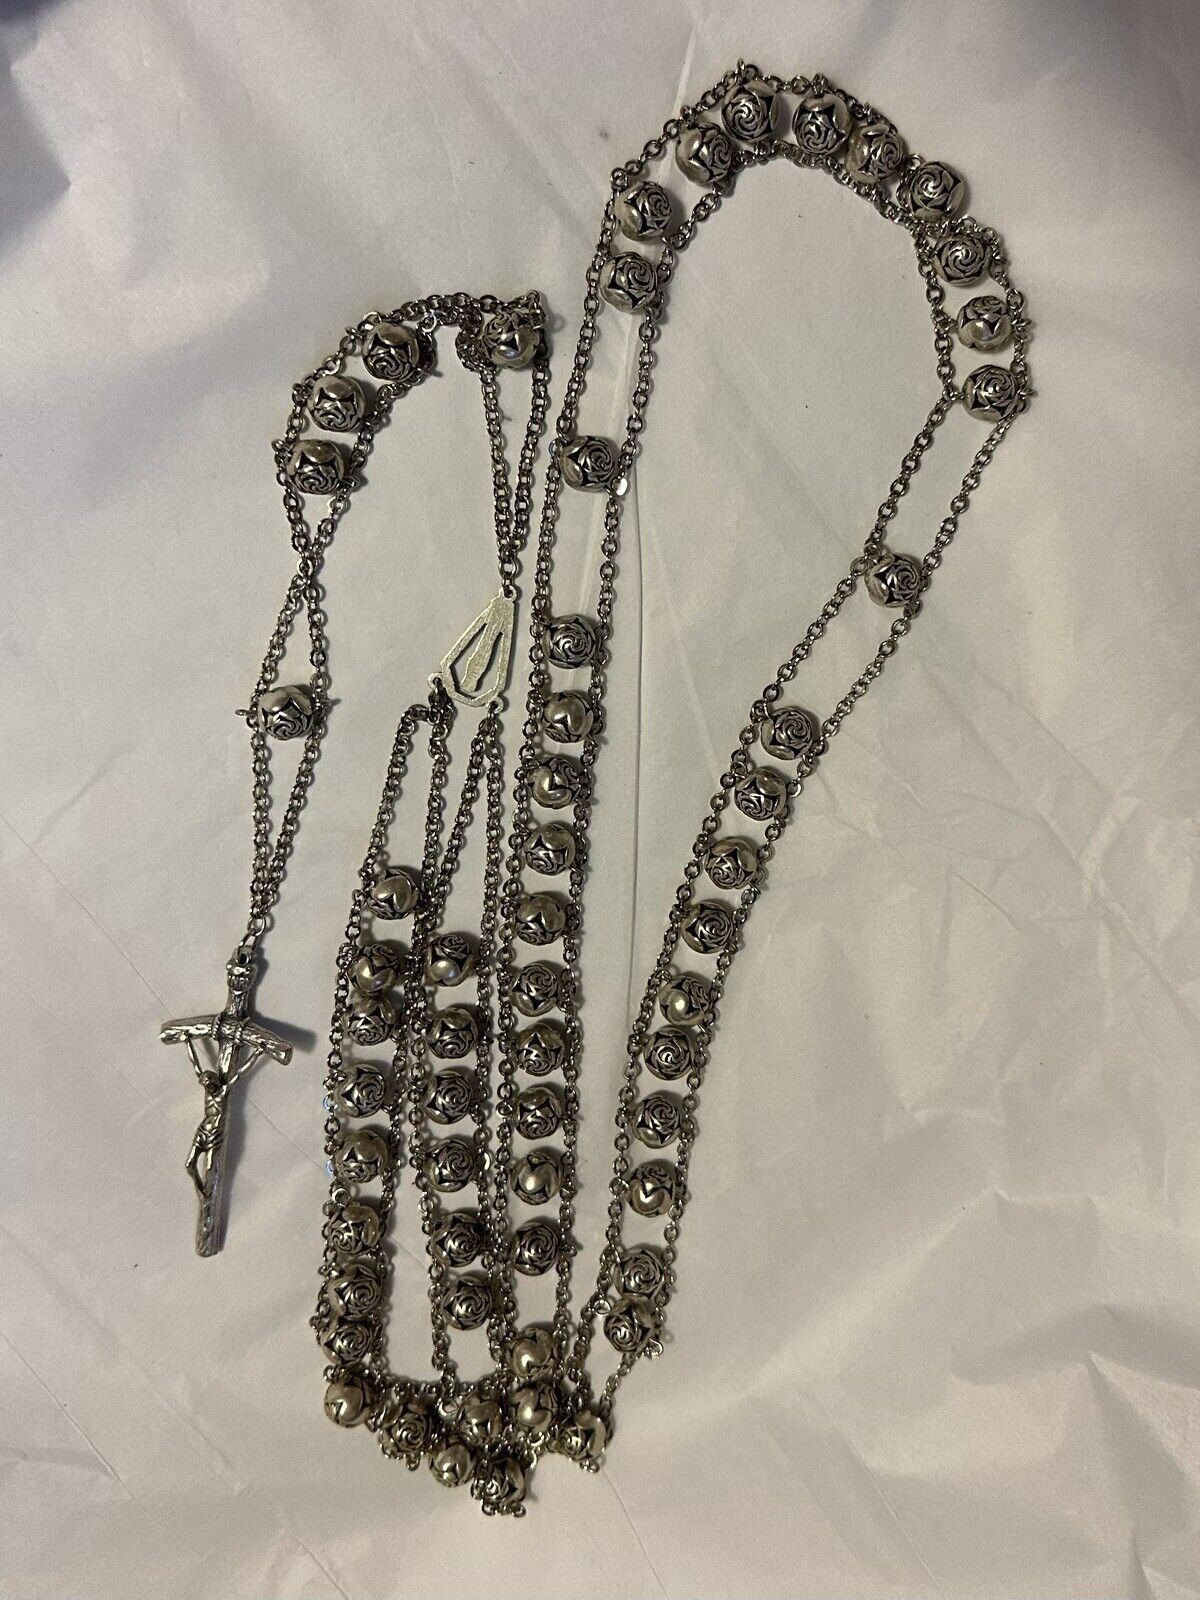  Vintage Jacob’s Ladder Rosary Beads Silver Rose Beads